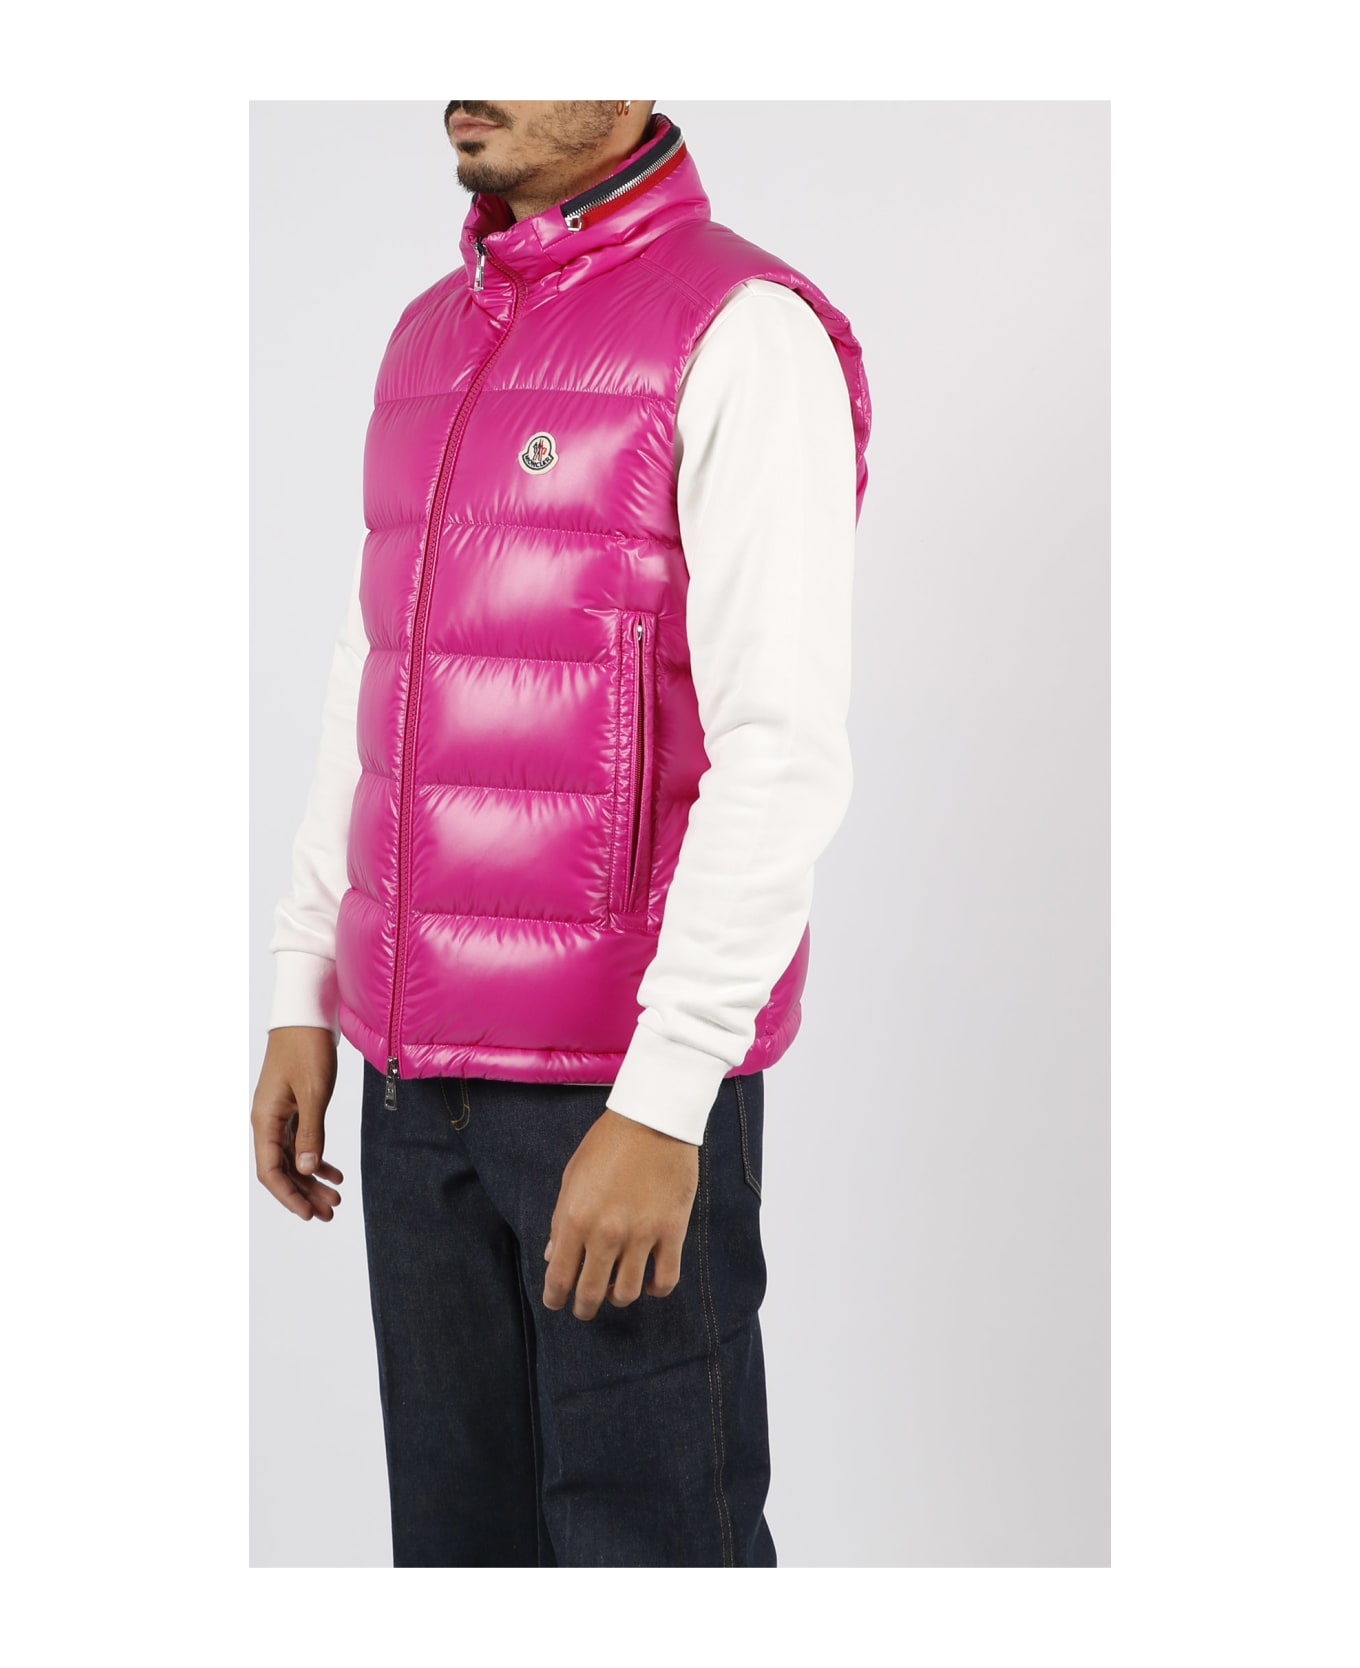 Moncler 'ouse' Vest - Pink & Purple ベスト